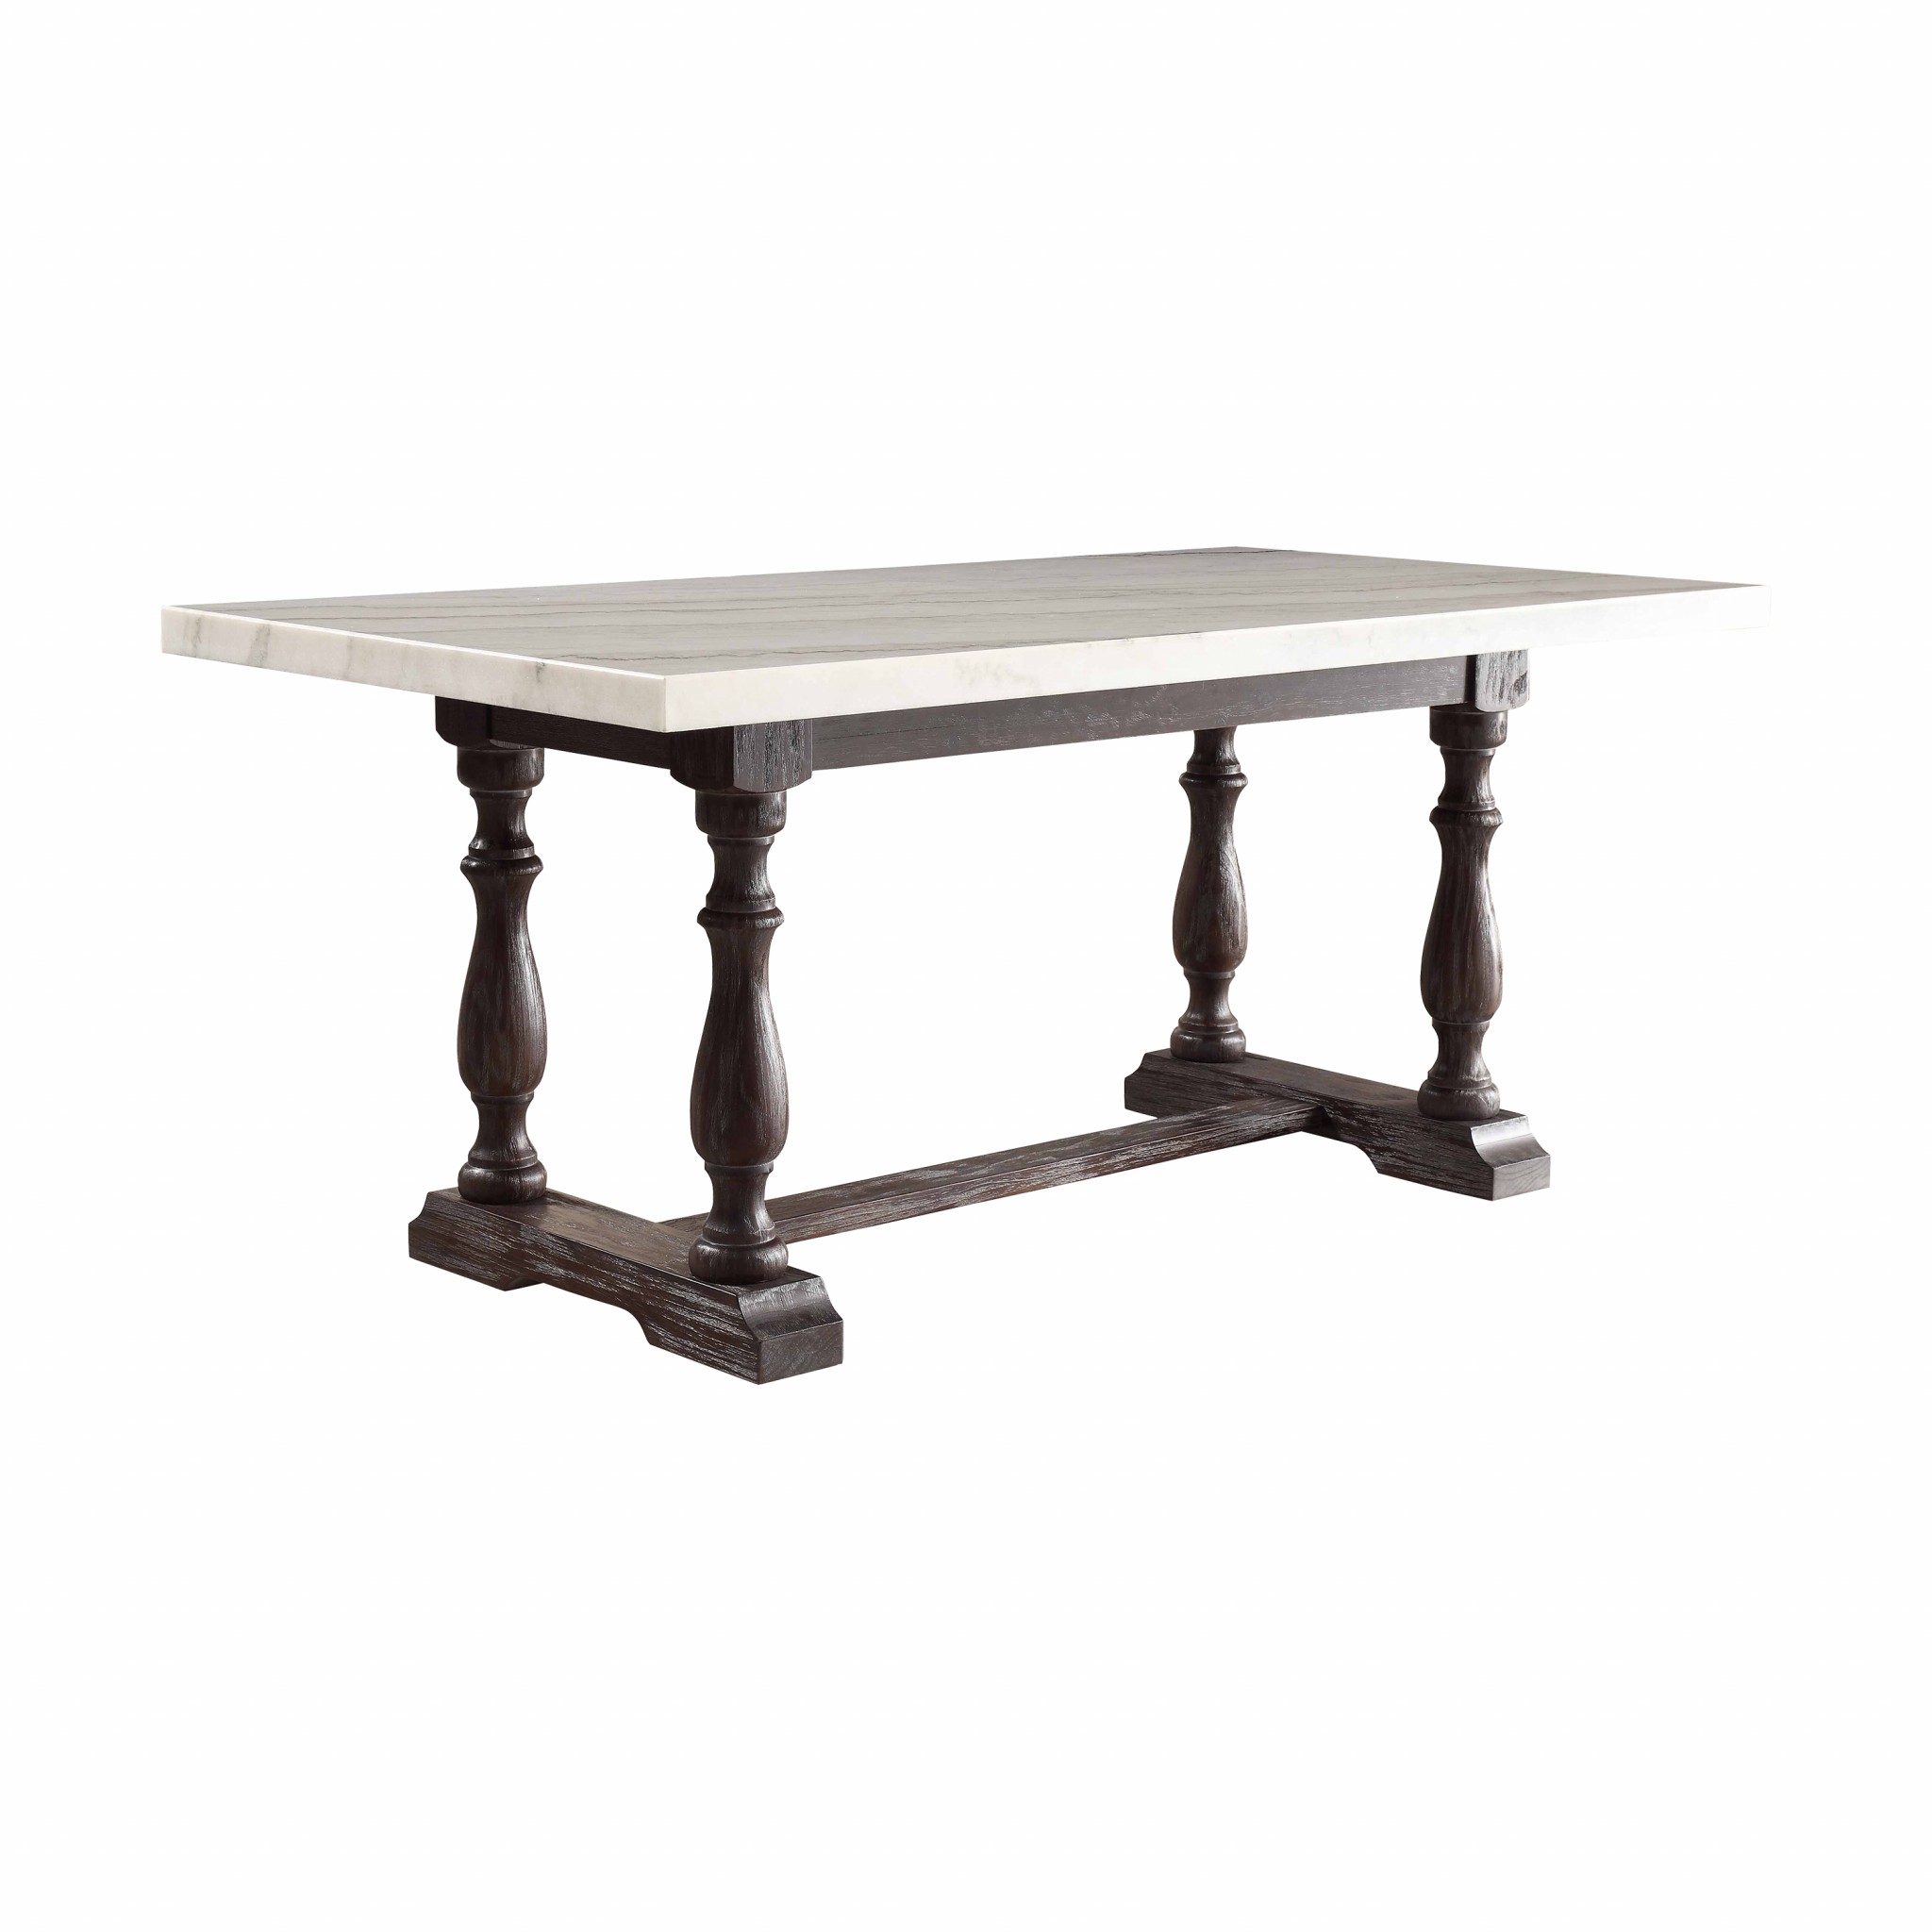 38" X 72" X 31" White Marble Weathered Espresso Wood Dining Table